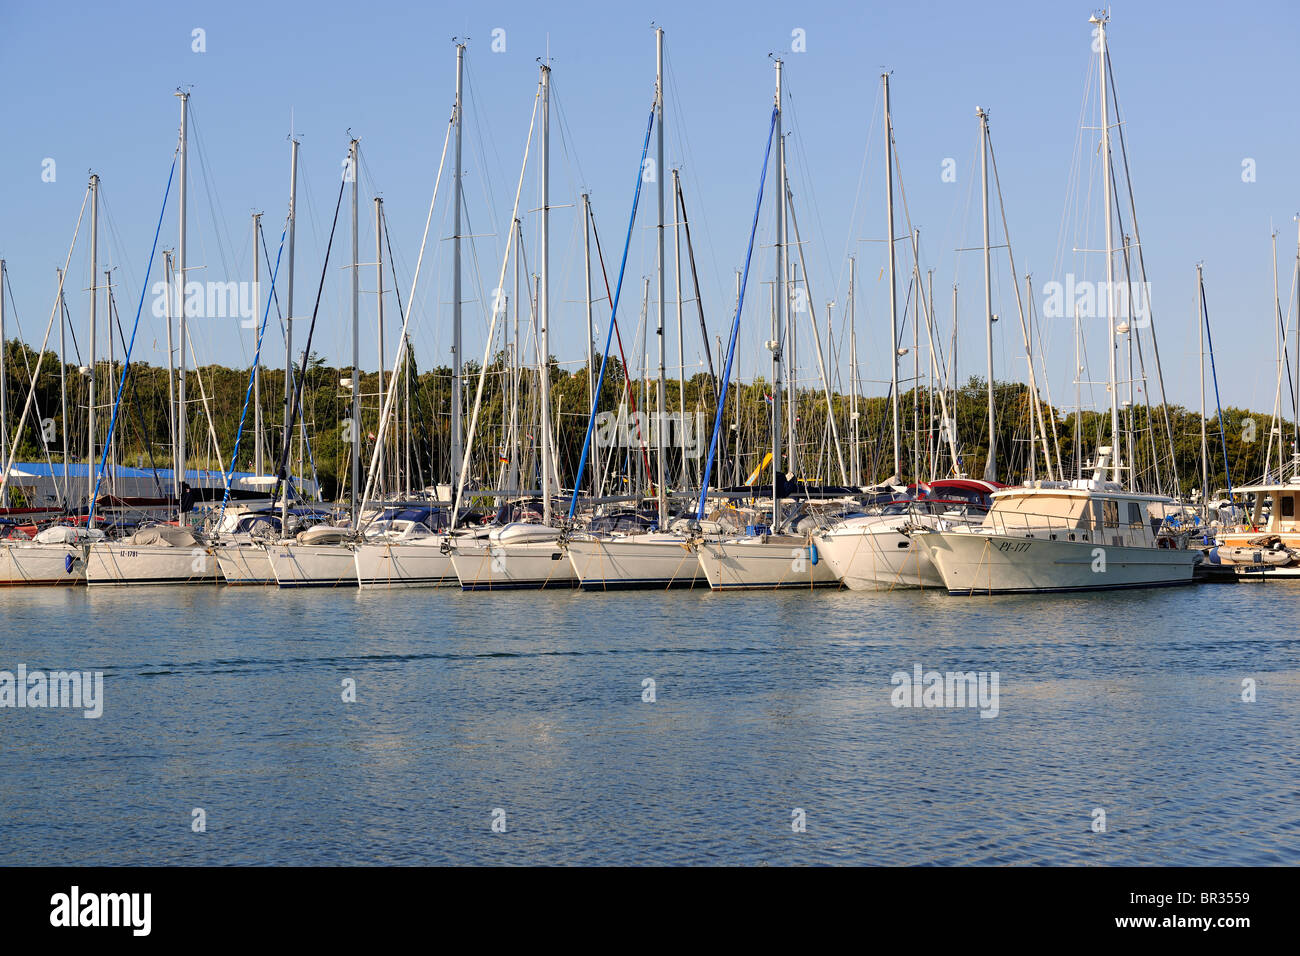 Yachts mooring in the Harbor Stock Photo